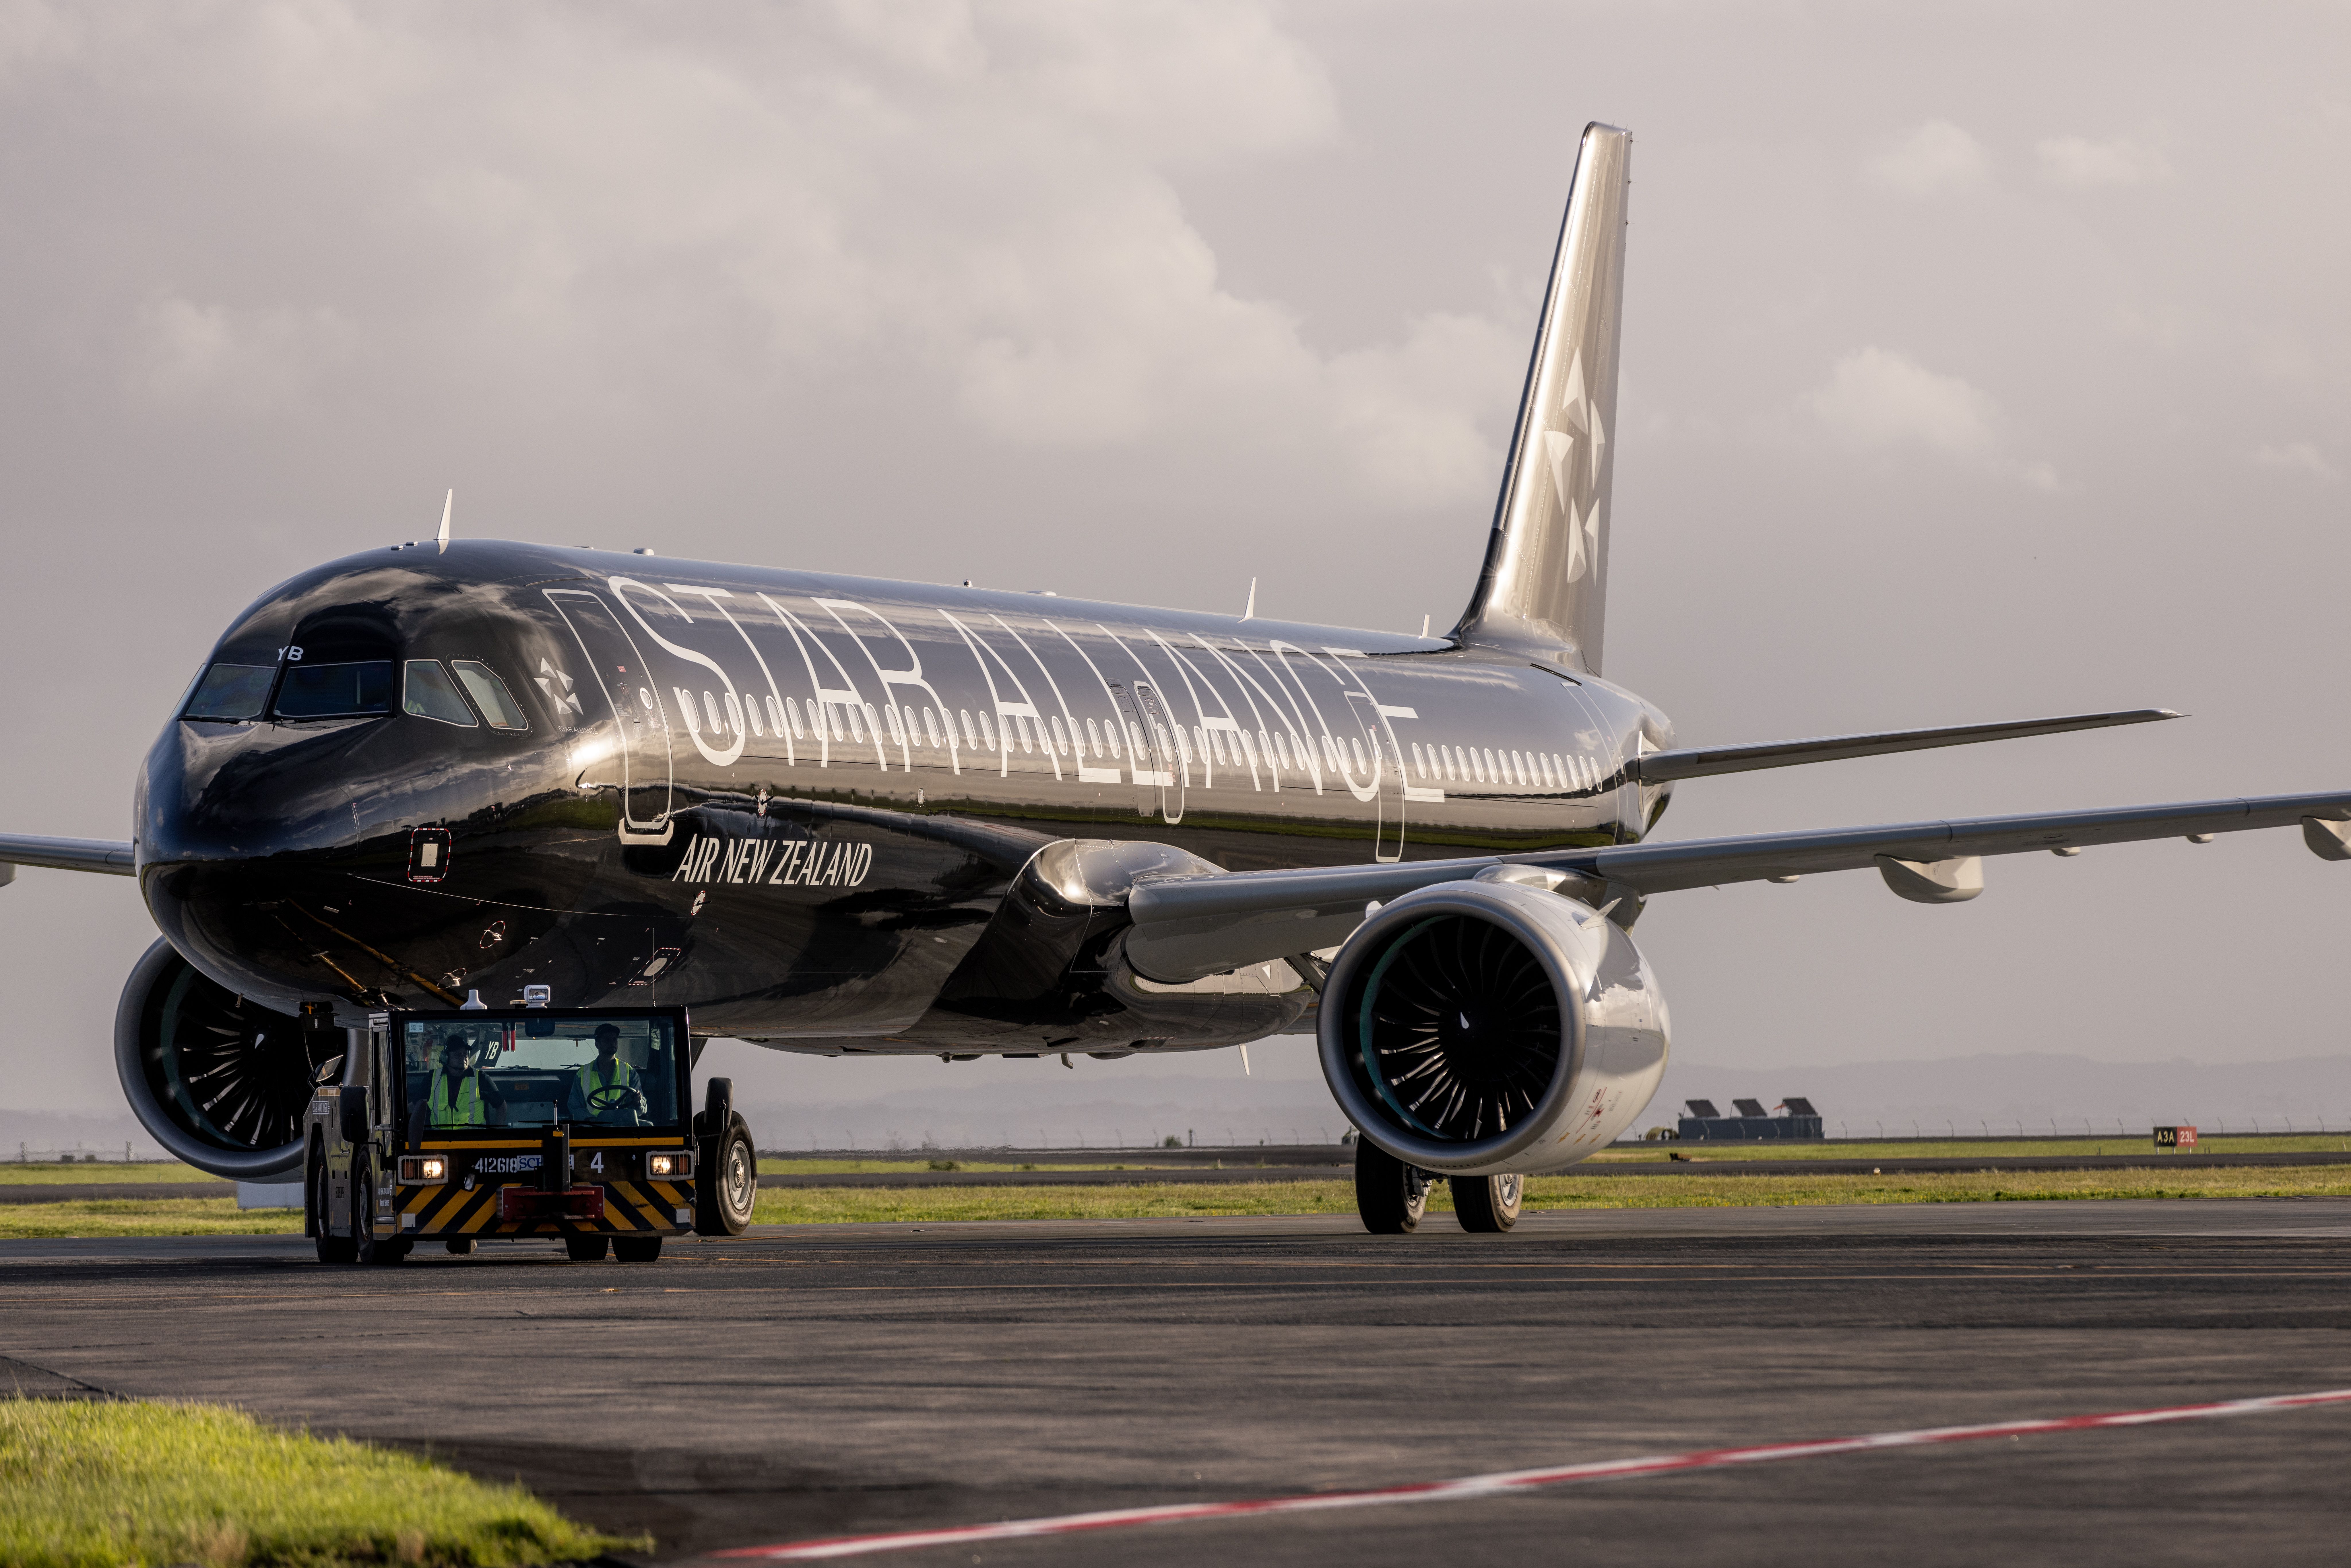 Air New Zealand's latest A321neo lands in Auckland